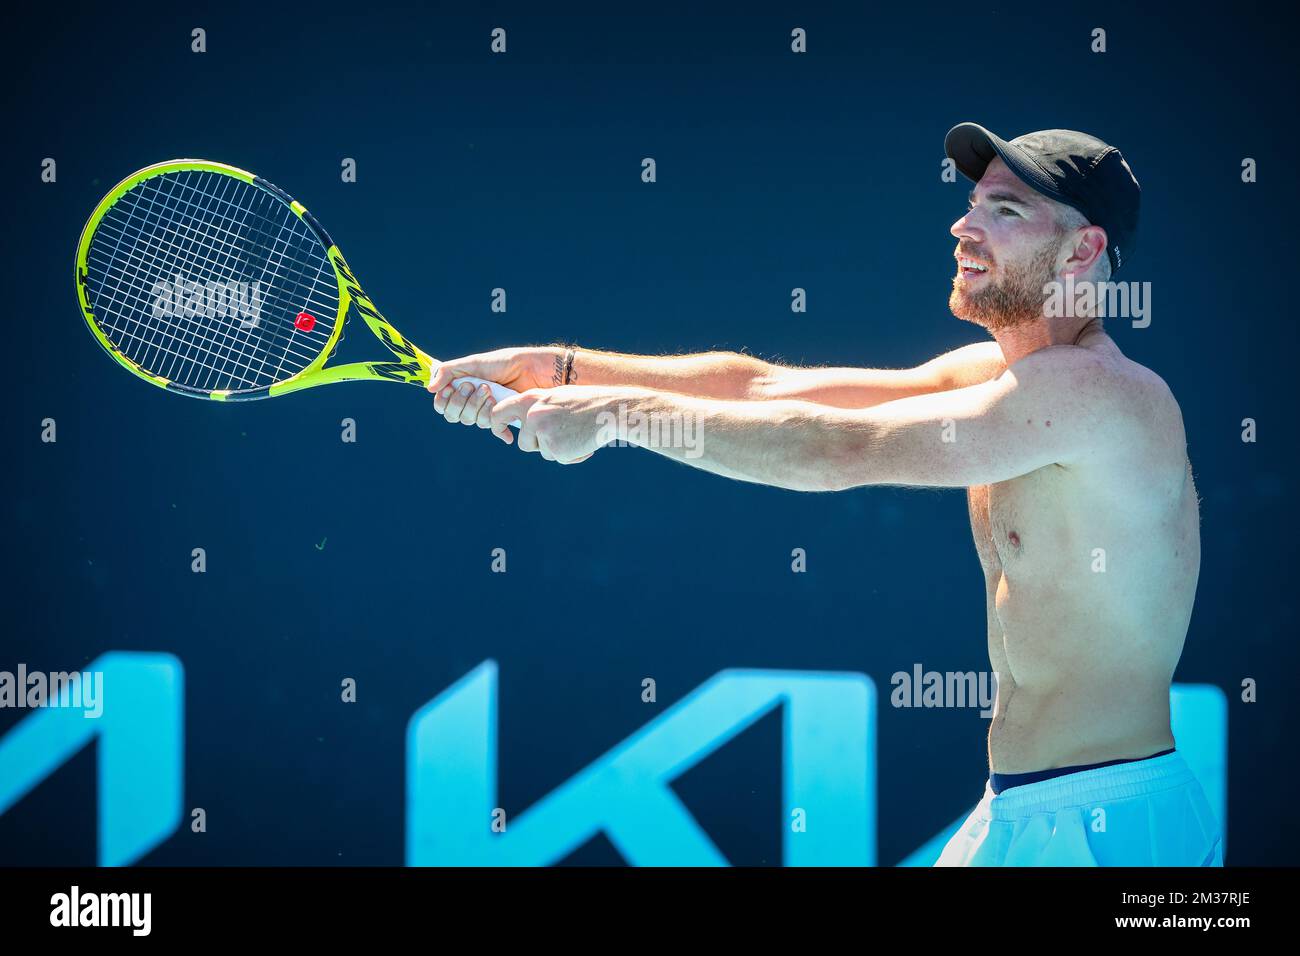 French Adrian Mannarino pictured during a training session, ahead of the Australian Open Grand Slam tennis tournament, Sunday 16 January 2022 in Melbourne Park, Melbourne, Australia